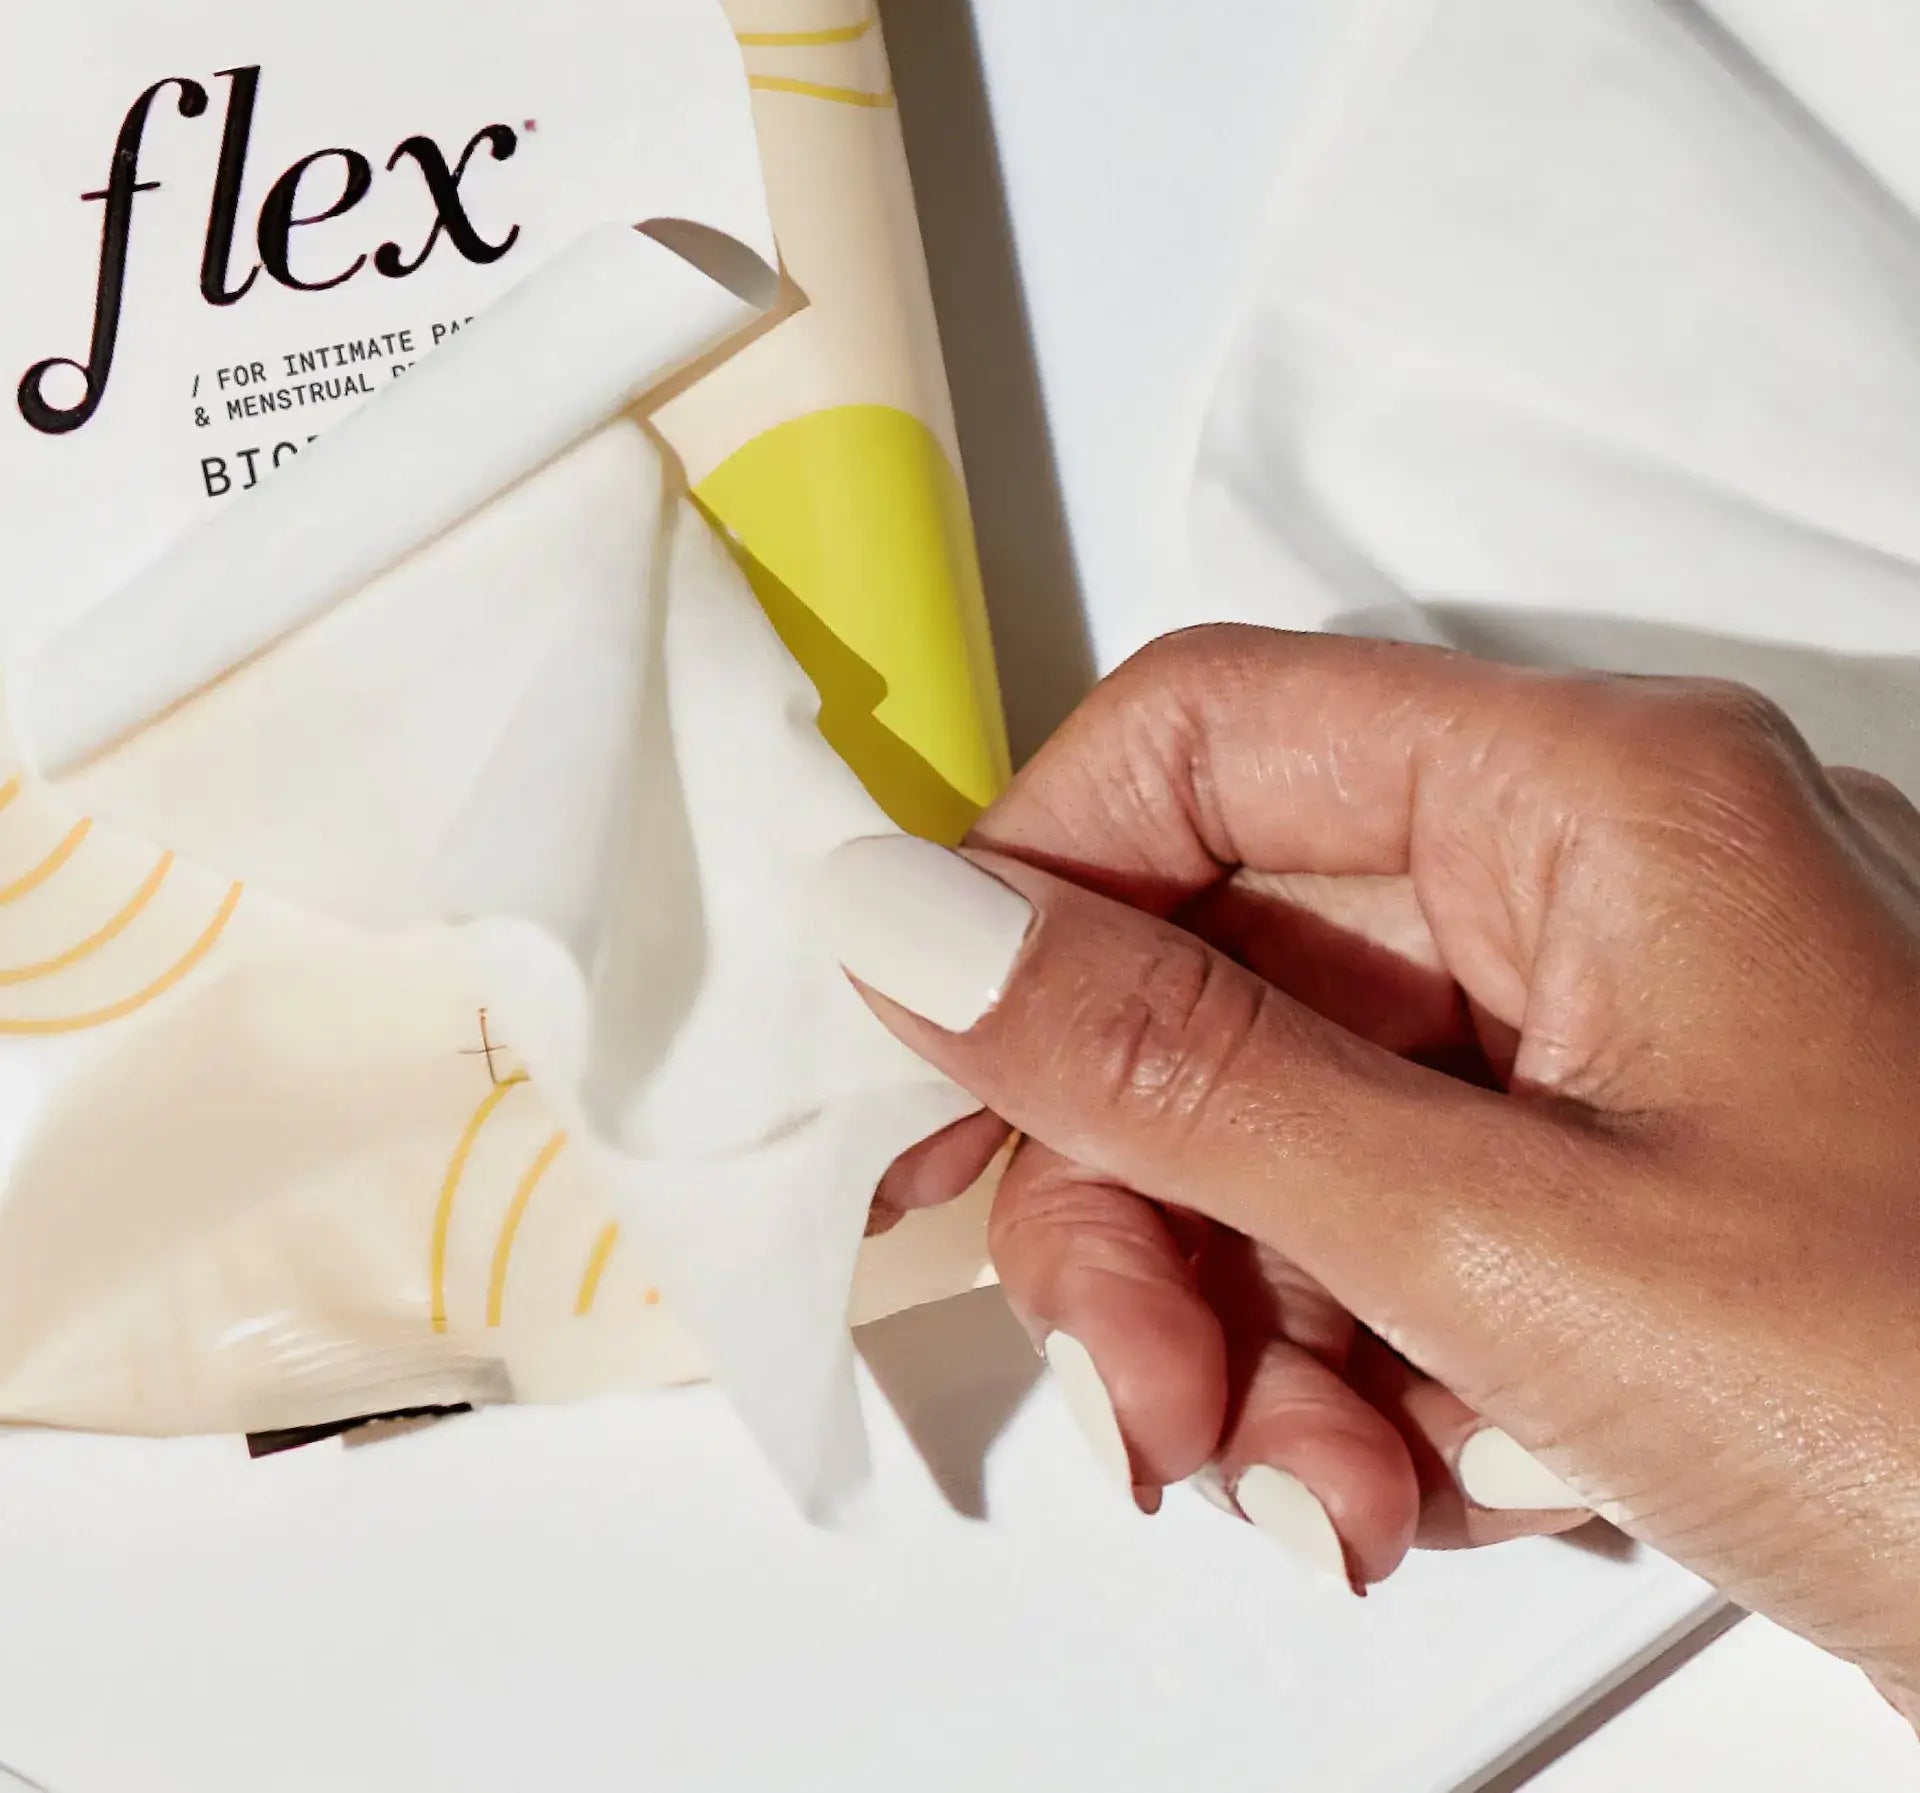 The Flex Company Launches Innovative & Sustainable Period Products in  25,000+ Retail Stores Nationwide